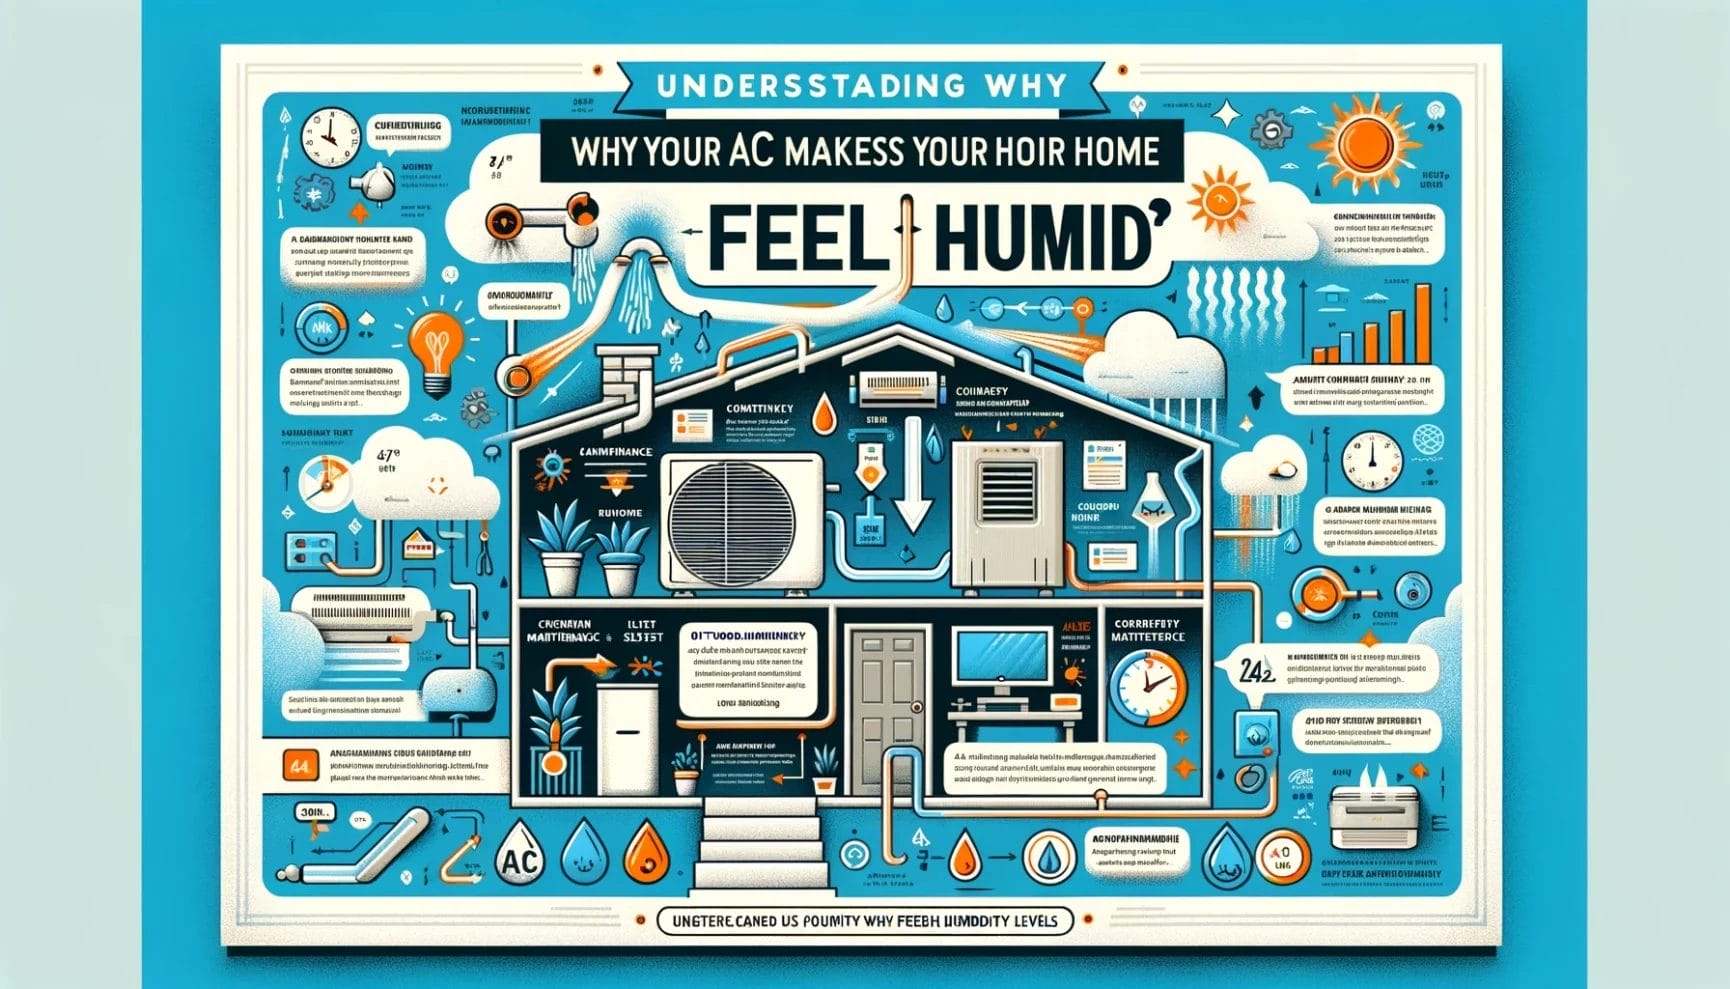 An informative infographic explaining why air conditioning makes a home feel humid, featuring various elements such as icons, text, and illustrations related to hvac systems and humidity concepts.